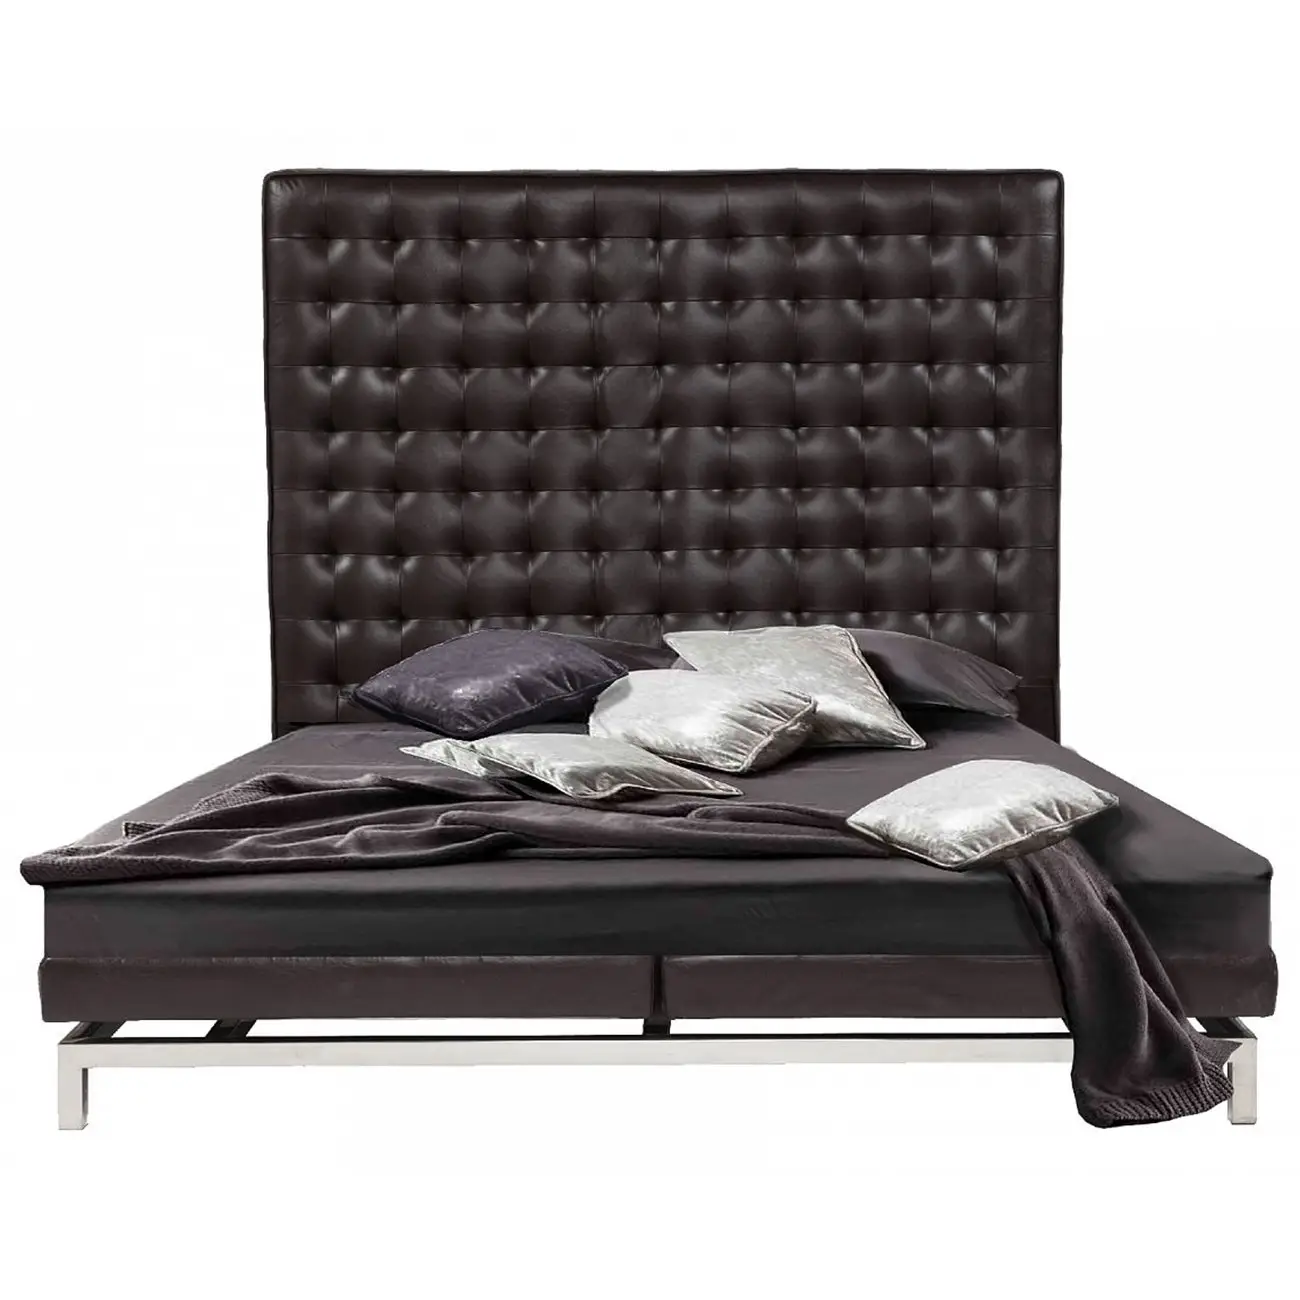 Double bed with leather headboard 180x200 cm brown Boss Bed